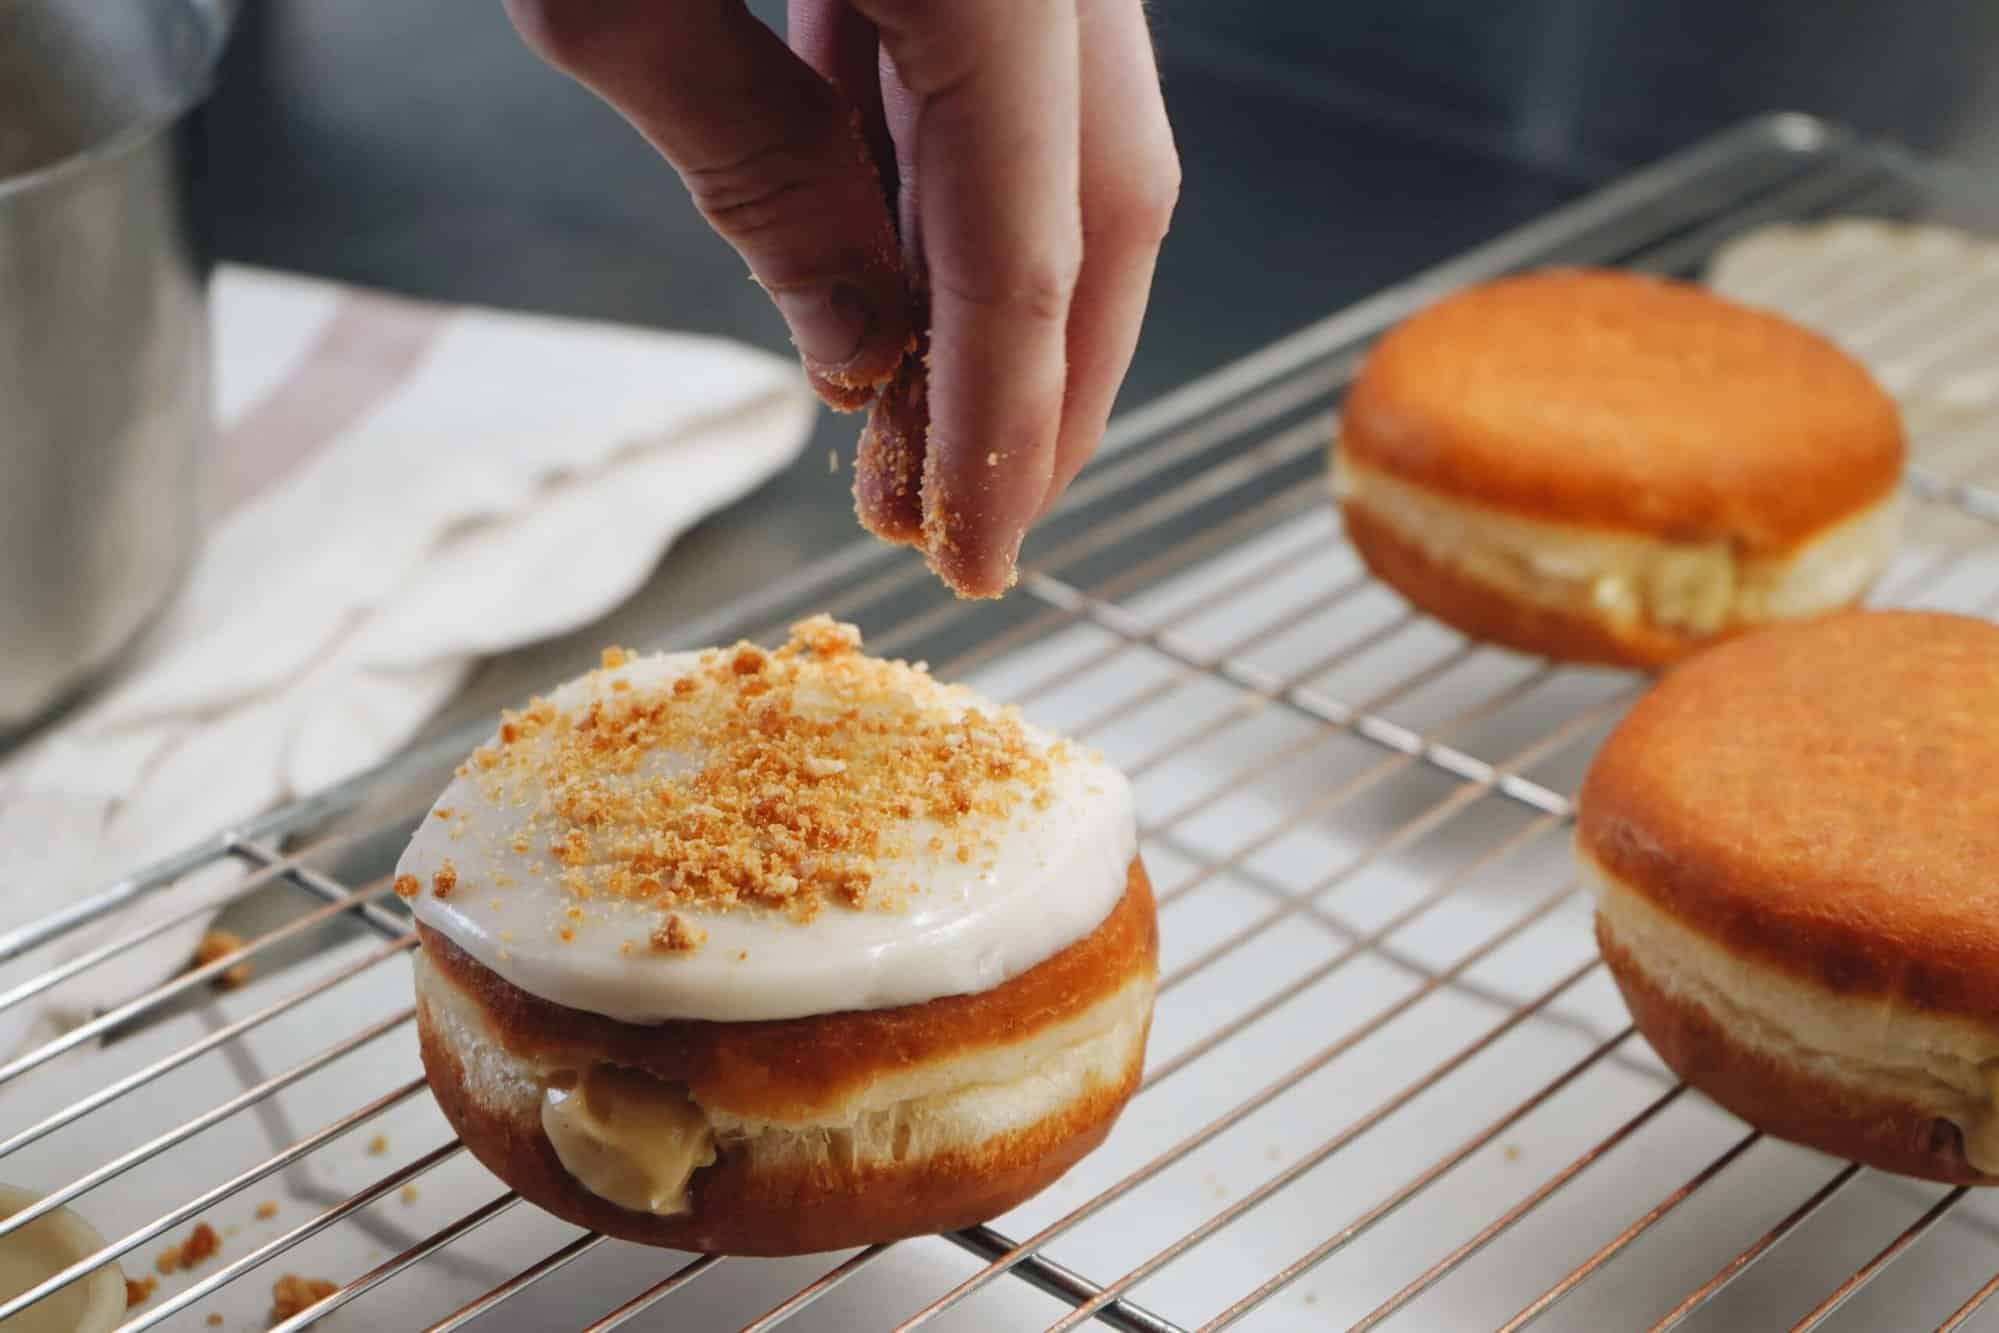 An iced, filled donut on a cooling rack while a person sprinkles crunchy speculoos over the top along with two un-iced donuts cooling on the rack as well.